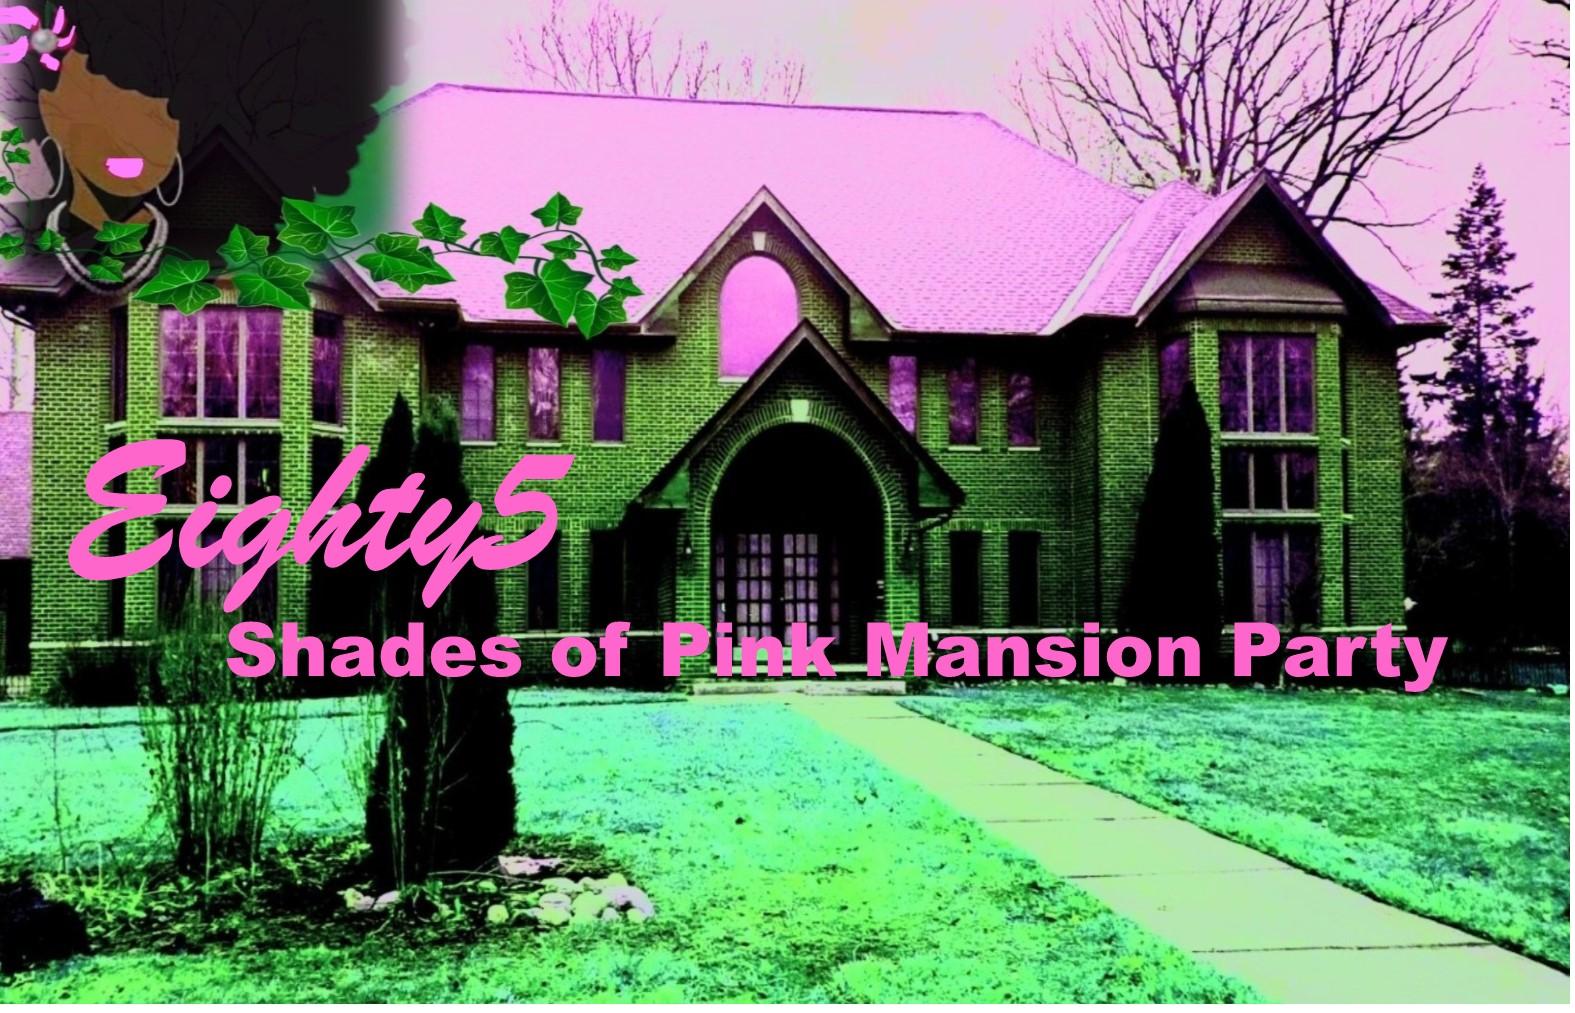 Eighty5 Shades of Pink Mansion Party